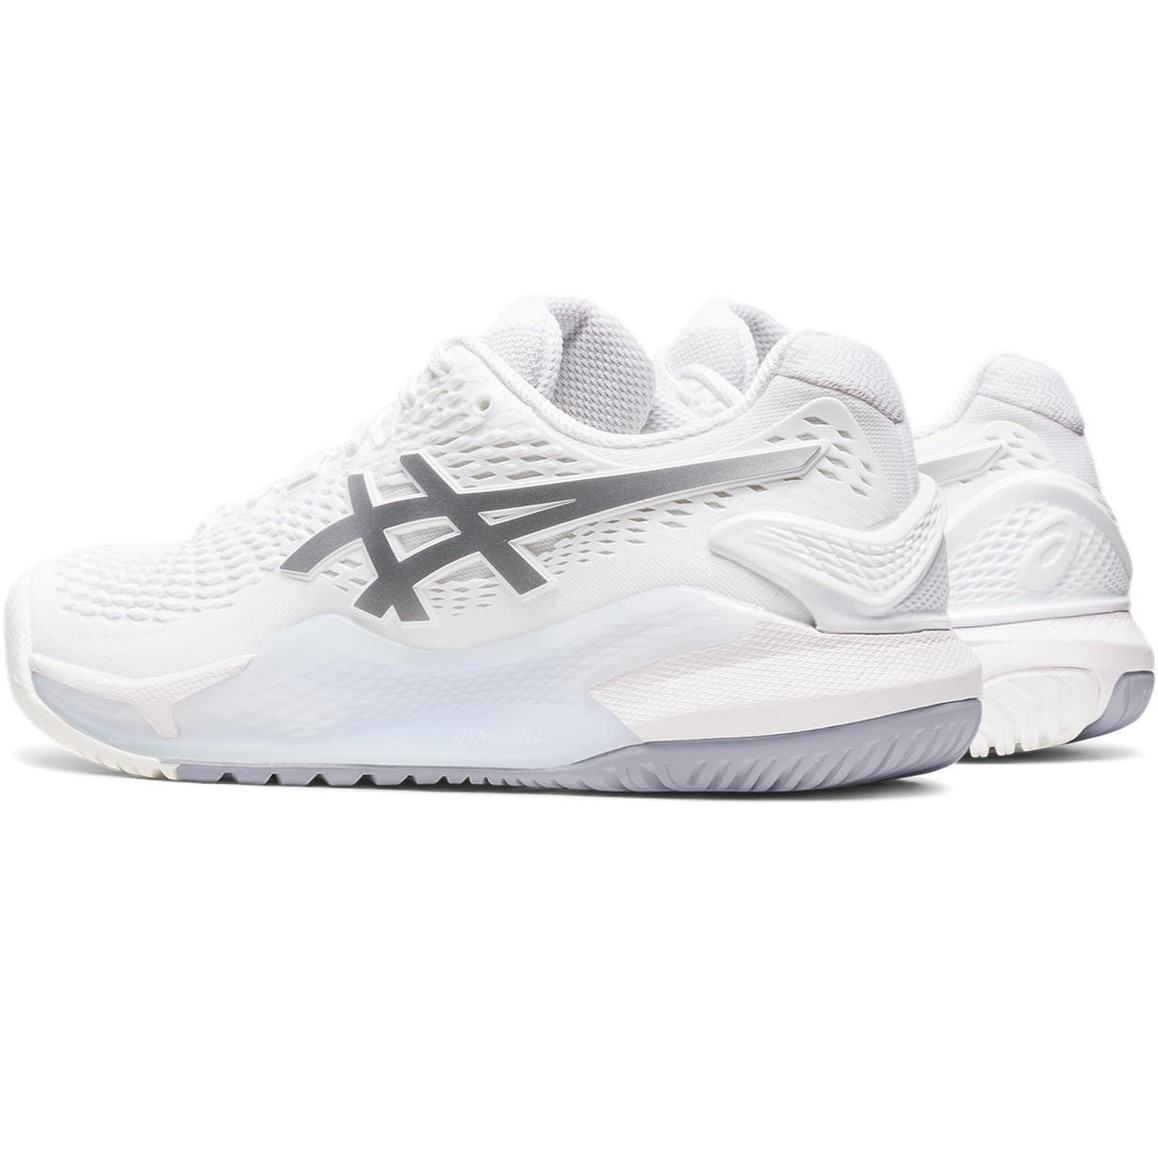 GIÀY ASICS NỮ GEL-RESOLUTION 9 WOMENS TENNIS SHOES WHITE PURE SILVER 1042A208-100 9